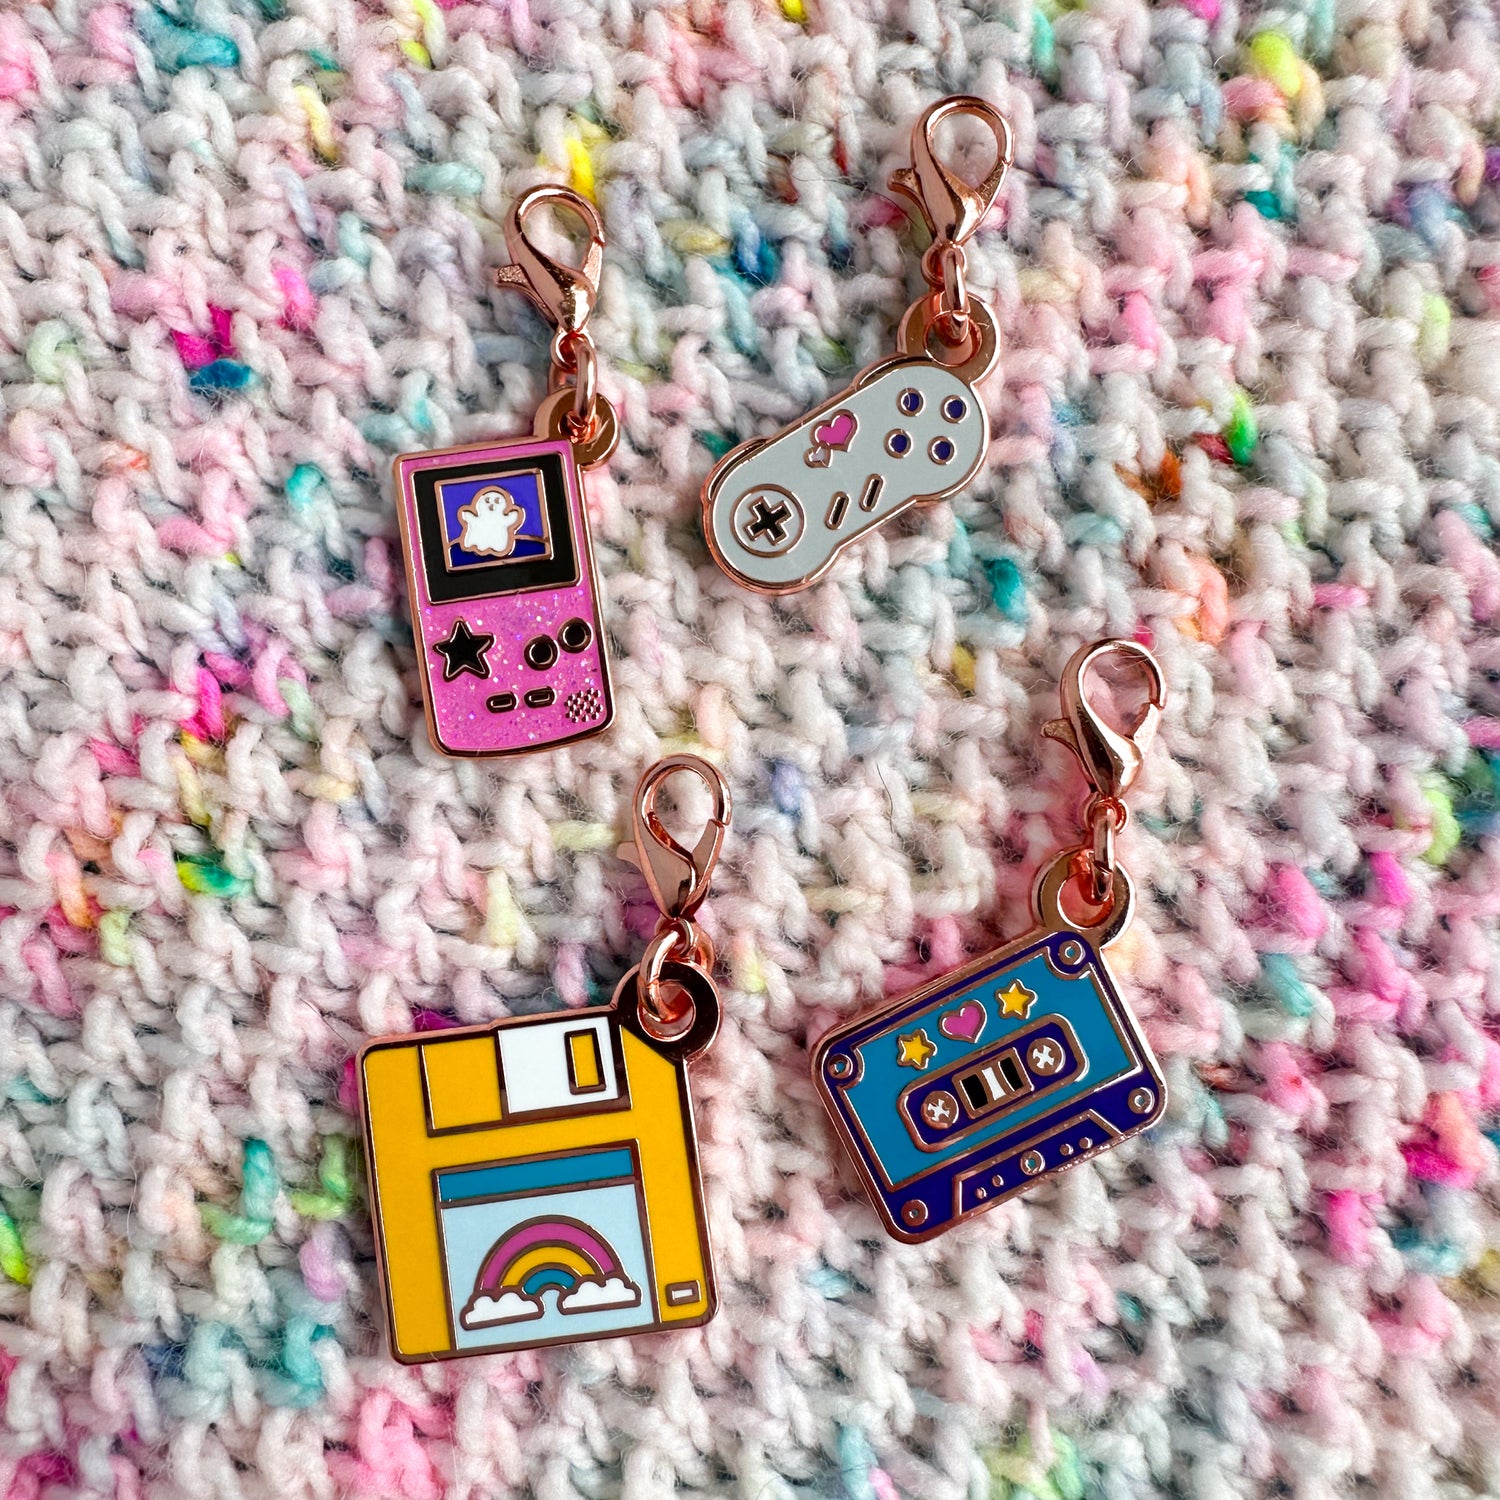 A set of four lobster claw clasp charms on a brioche stitch knitted background in pastel confetti yarn. The charms are shaped like a gameboy, game controller, floppy disk, and cassette tape.